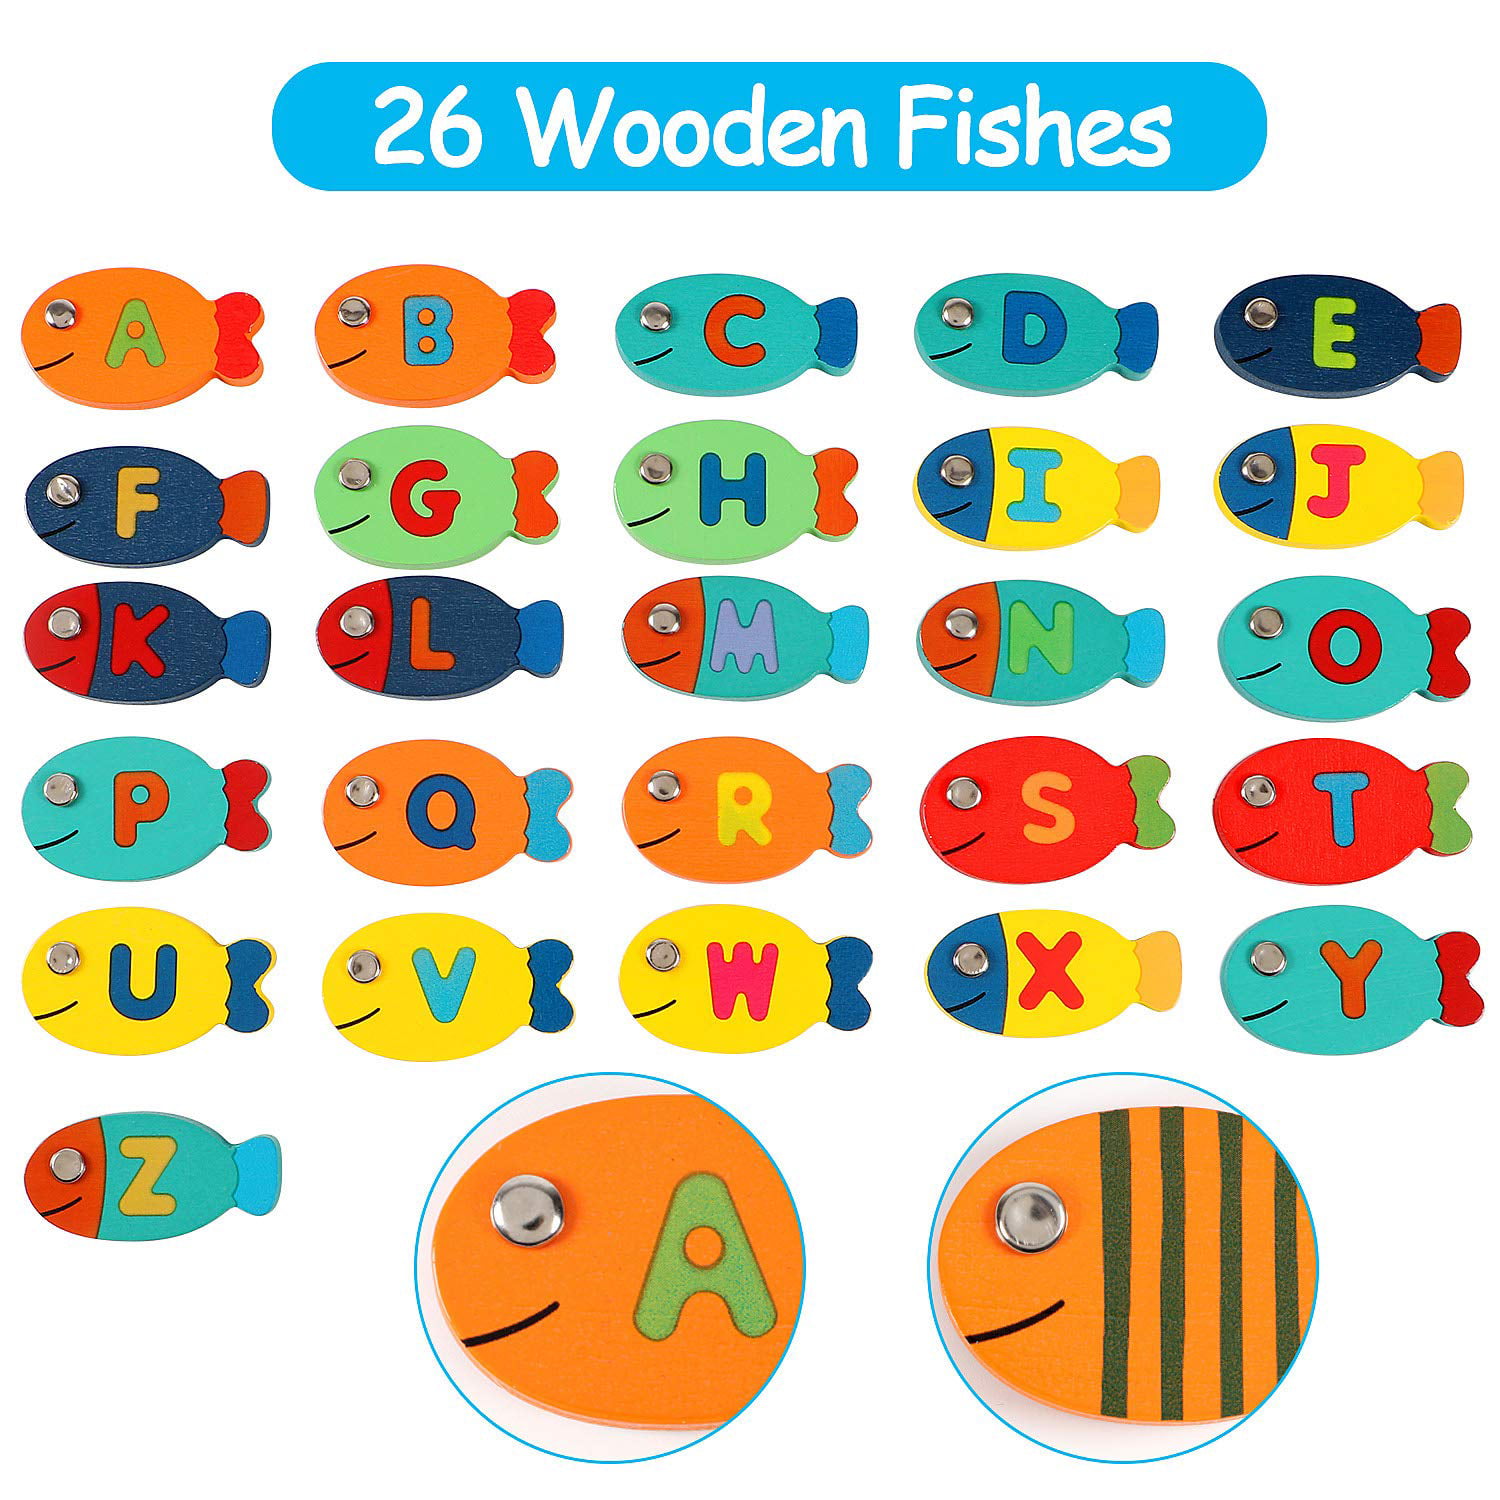 Lewo wooden Fishing Game magnetic Toy Kids 36m+